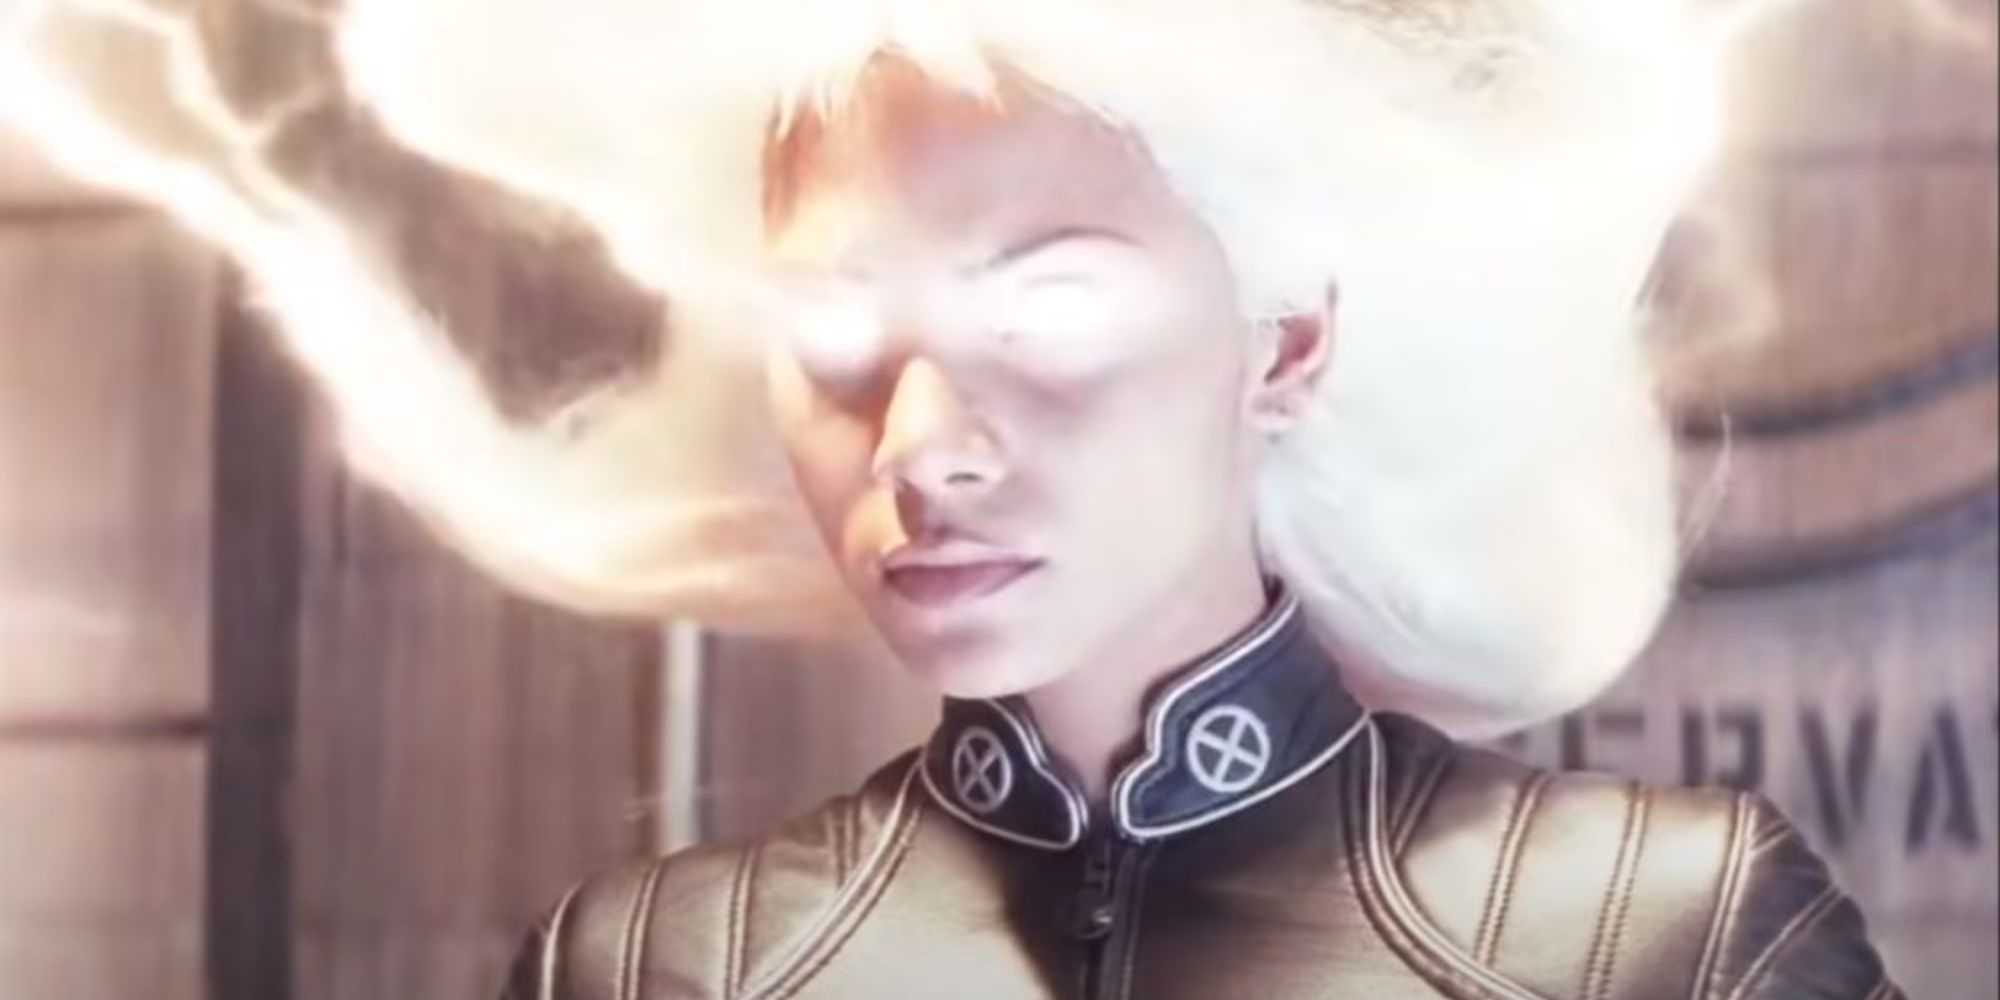 Berry as Storm using her powers in X-Men